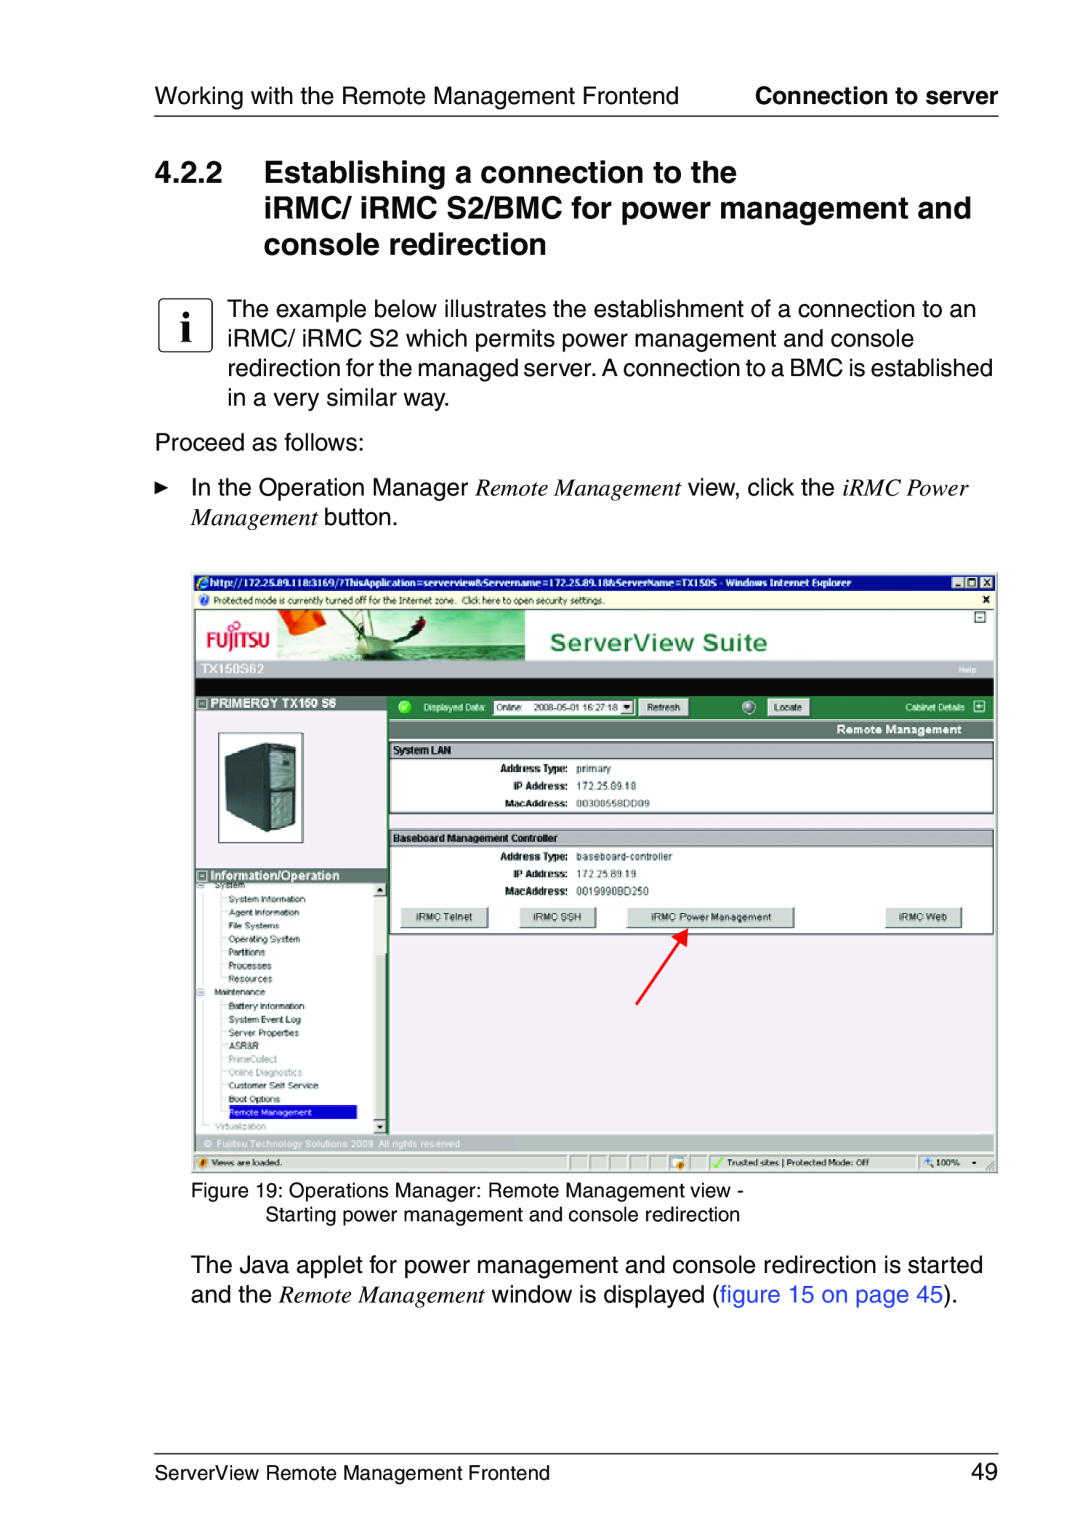 Fujitsu V4.90 manual Establishing a connection to the, iRMC/ iRMC S2/BMC for power management and console redirection 